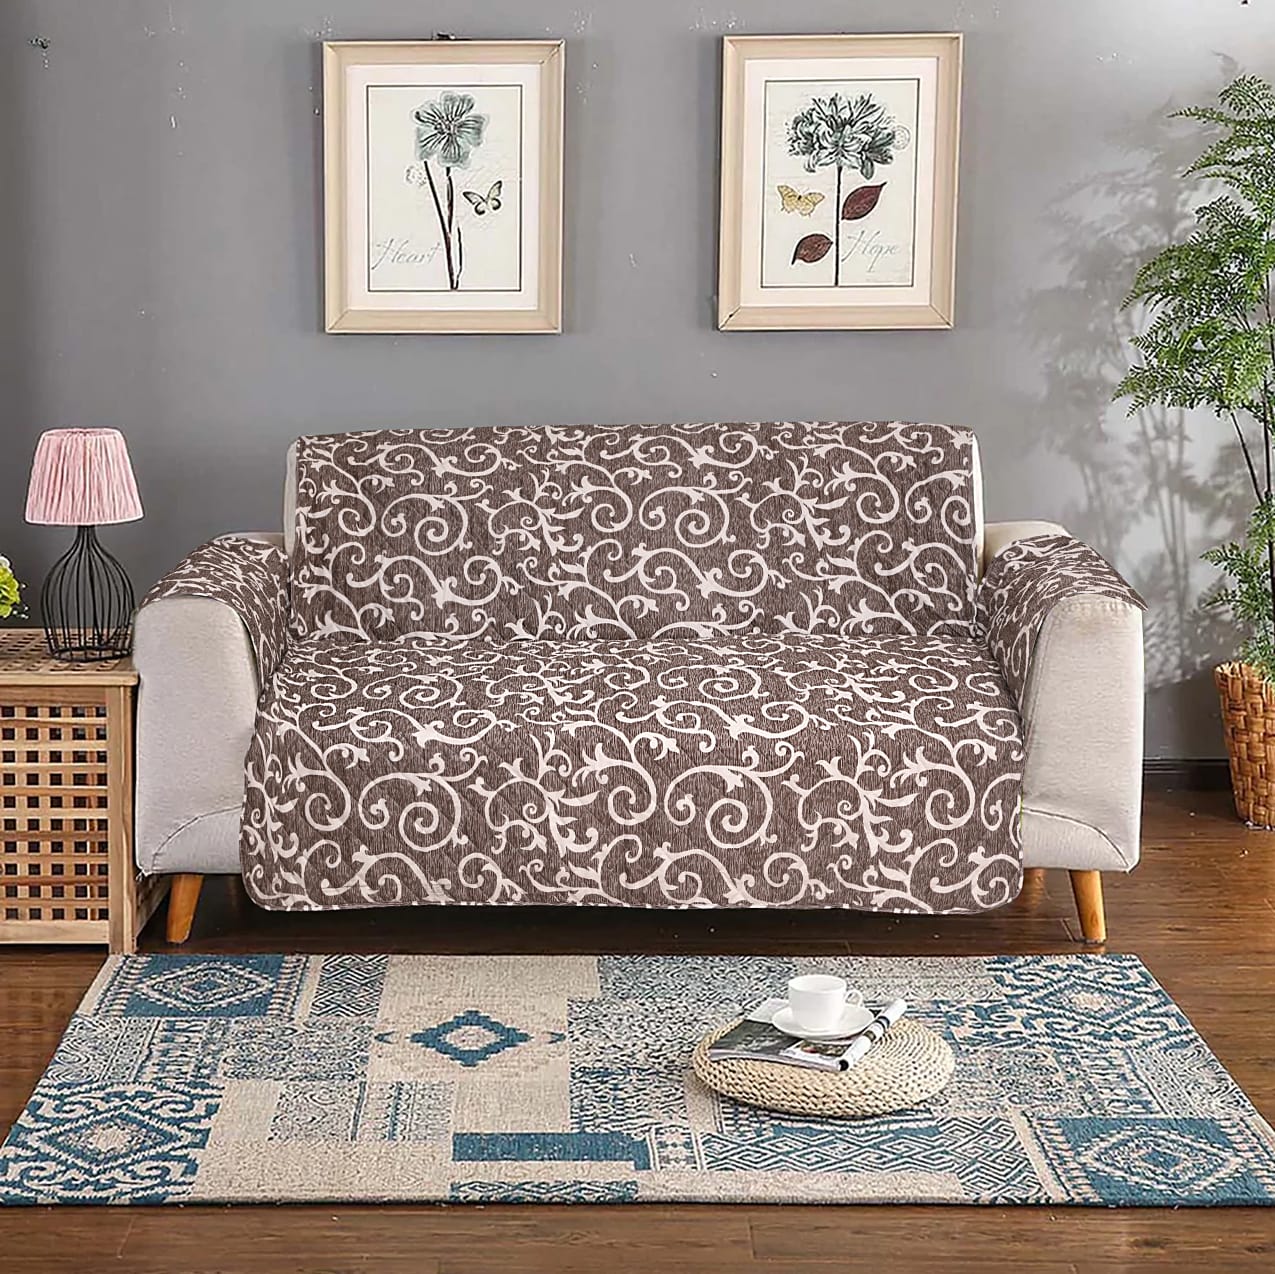 Printed Cotton Quilted Sofa Couch Cover - Sofa Protectors (Tex Brown)